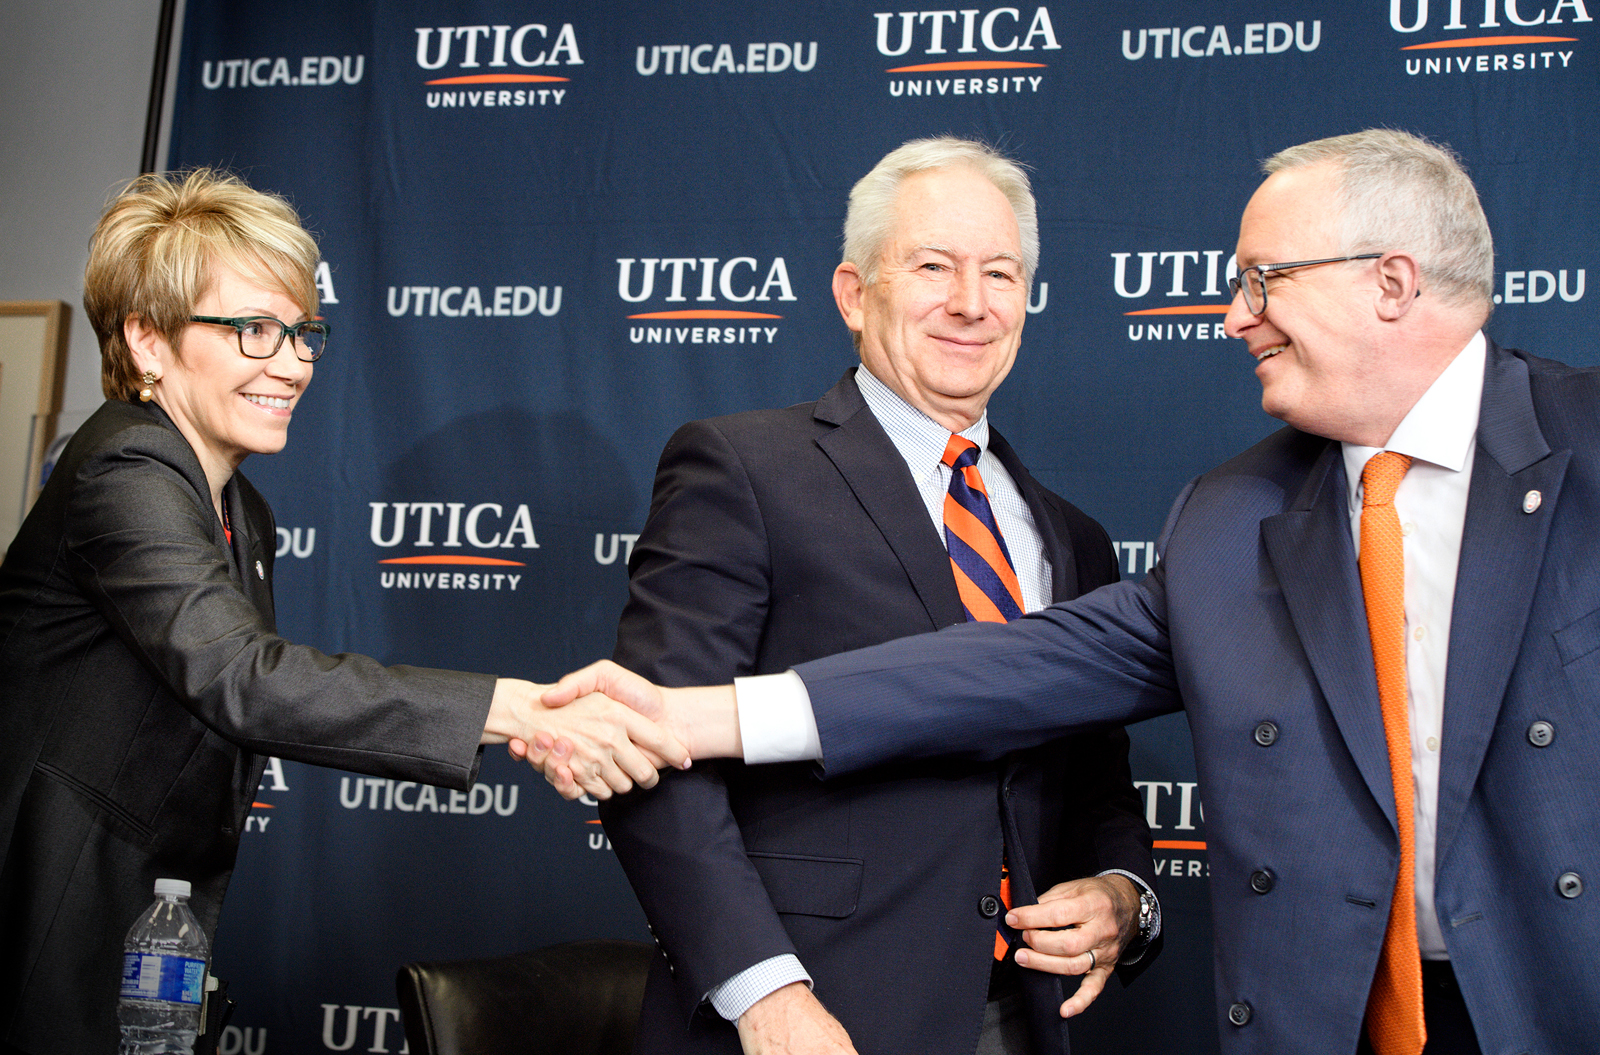 Dr. Pfannestiel (right) shakes President Casamento's hand at the announcement